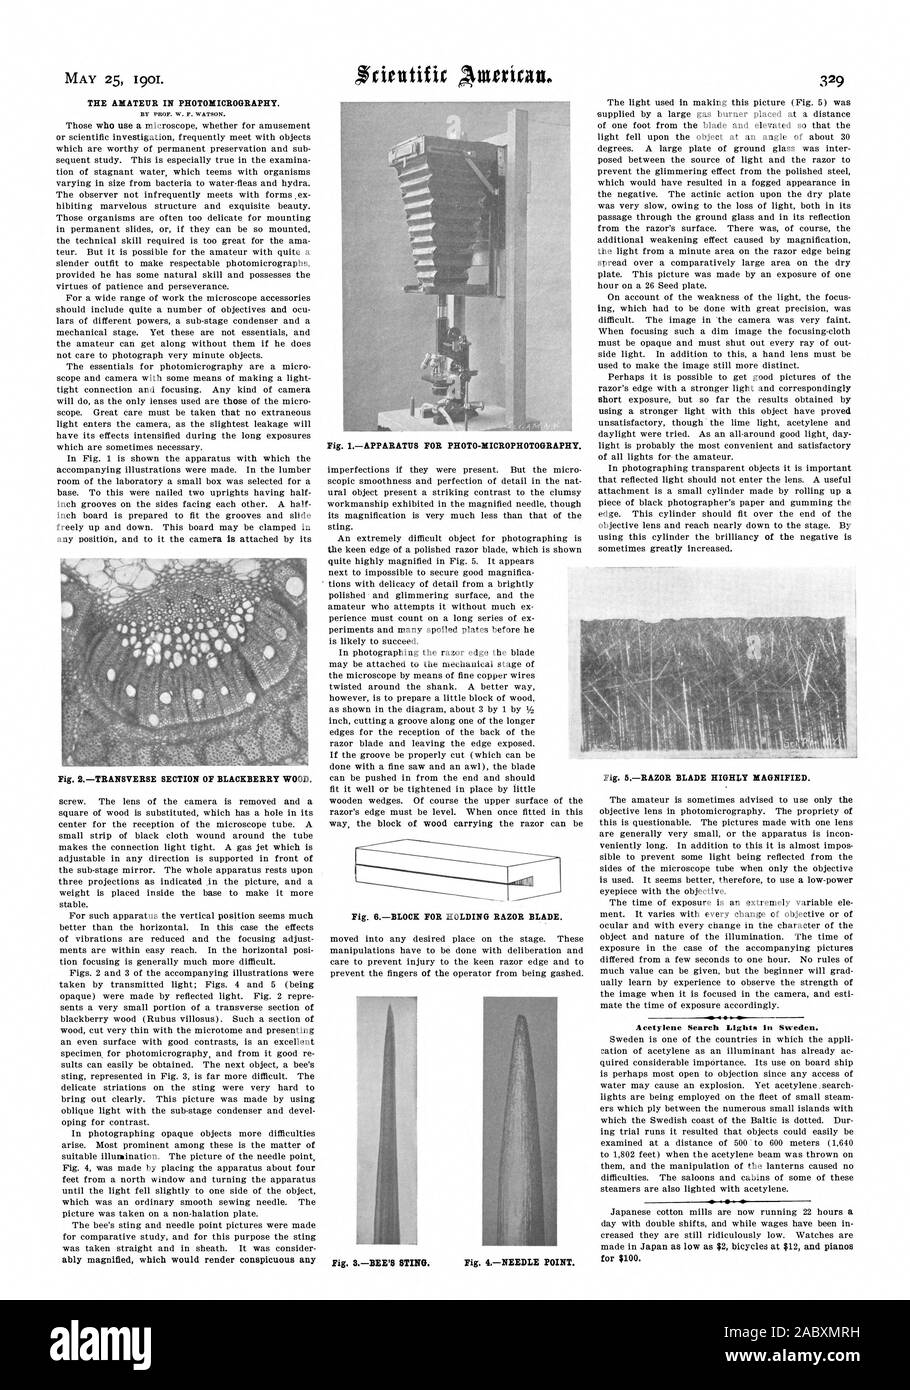 THE AMATEUR IN PHOTOMICROGRAPHY. Fig. 2TRANSVERSE SECTION OF BLACKBERRY WOOD. Fig. 6BLOCK FOR HOLDING RAZOR BLADE. Fig. 5RAZOR BLADE HIGHLY MAGNIFIED. Acetylene Search Lights In Sweden. for $100., scientific american, 1901-05-25 Stock Photo